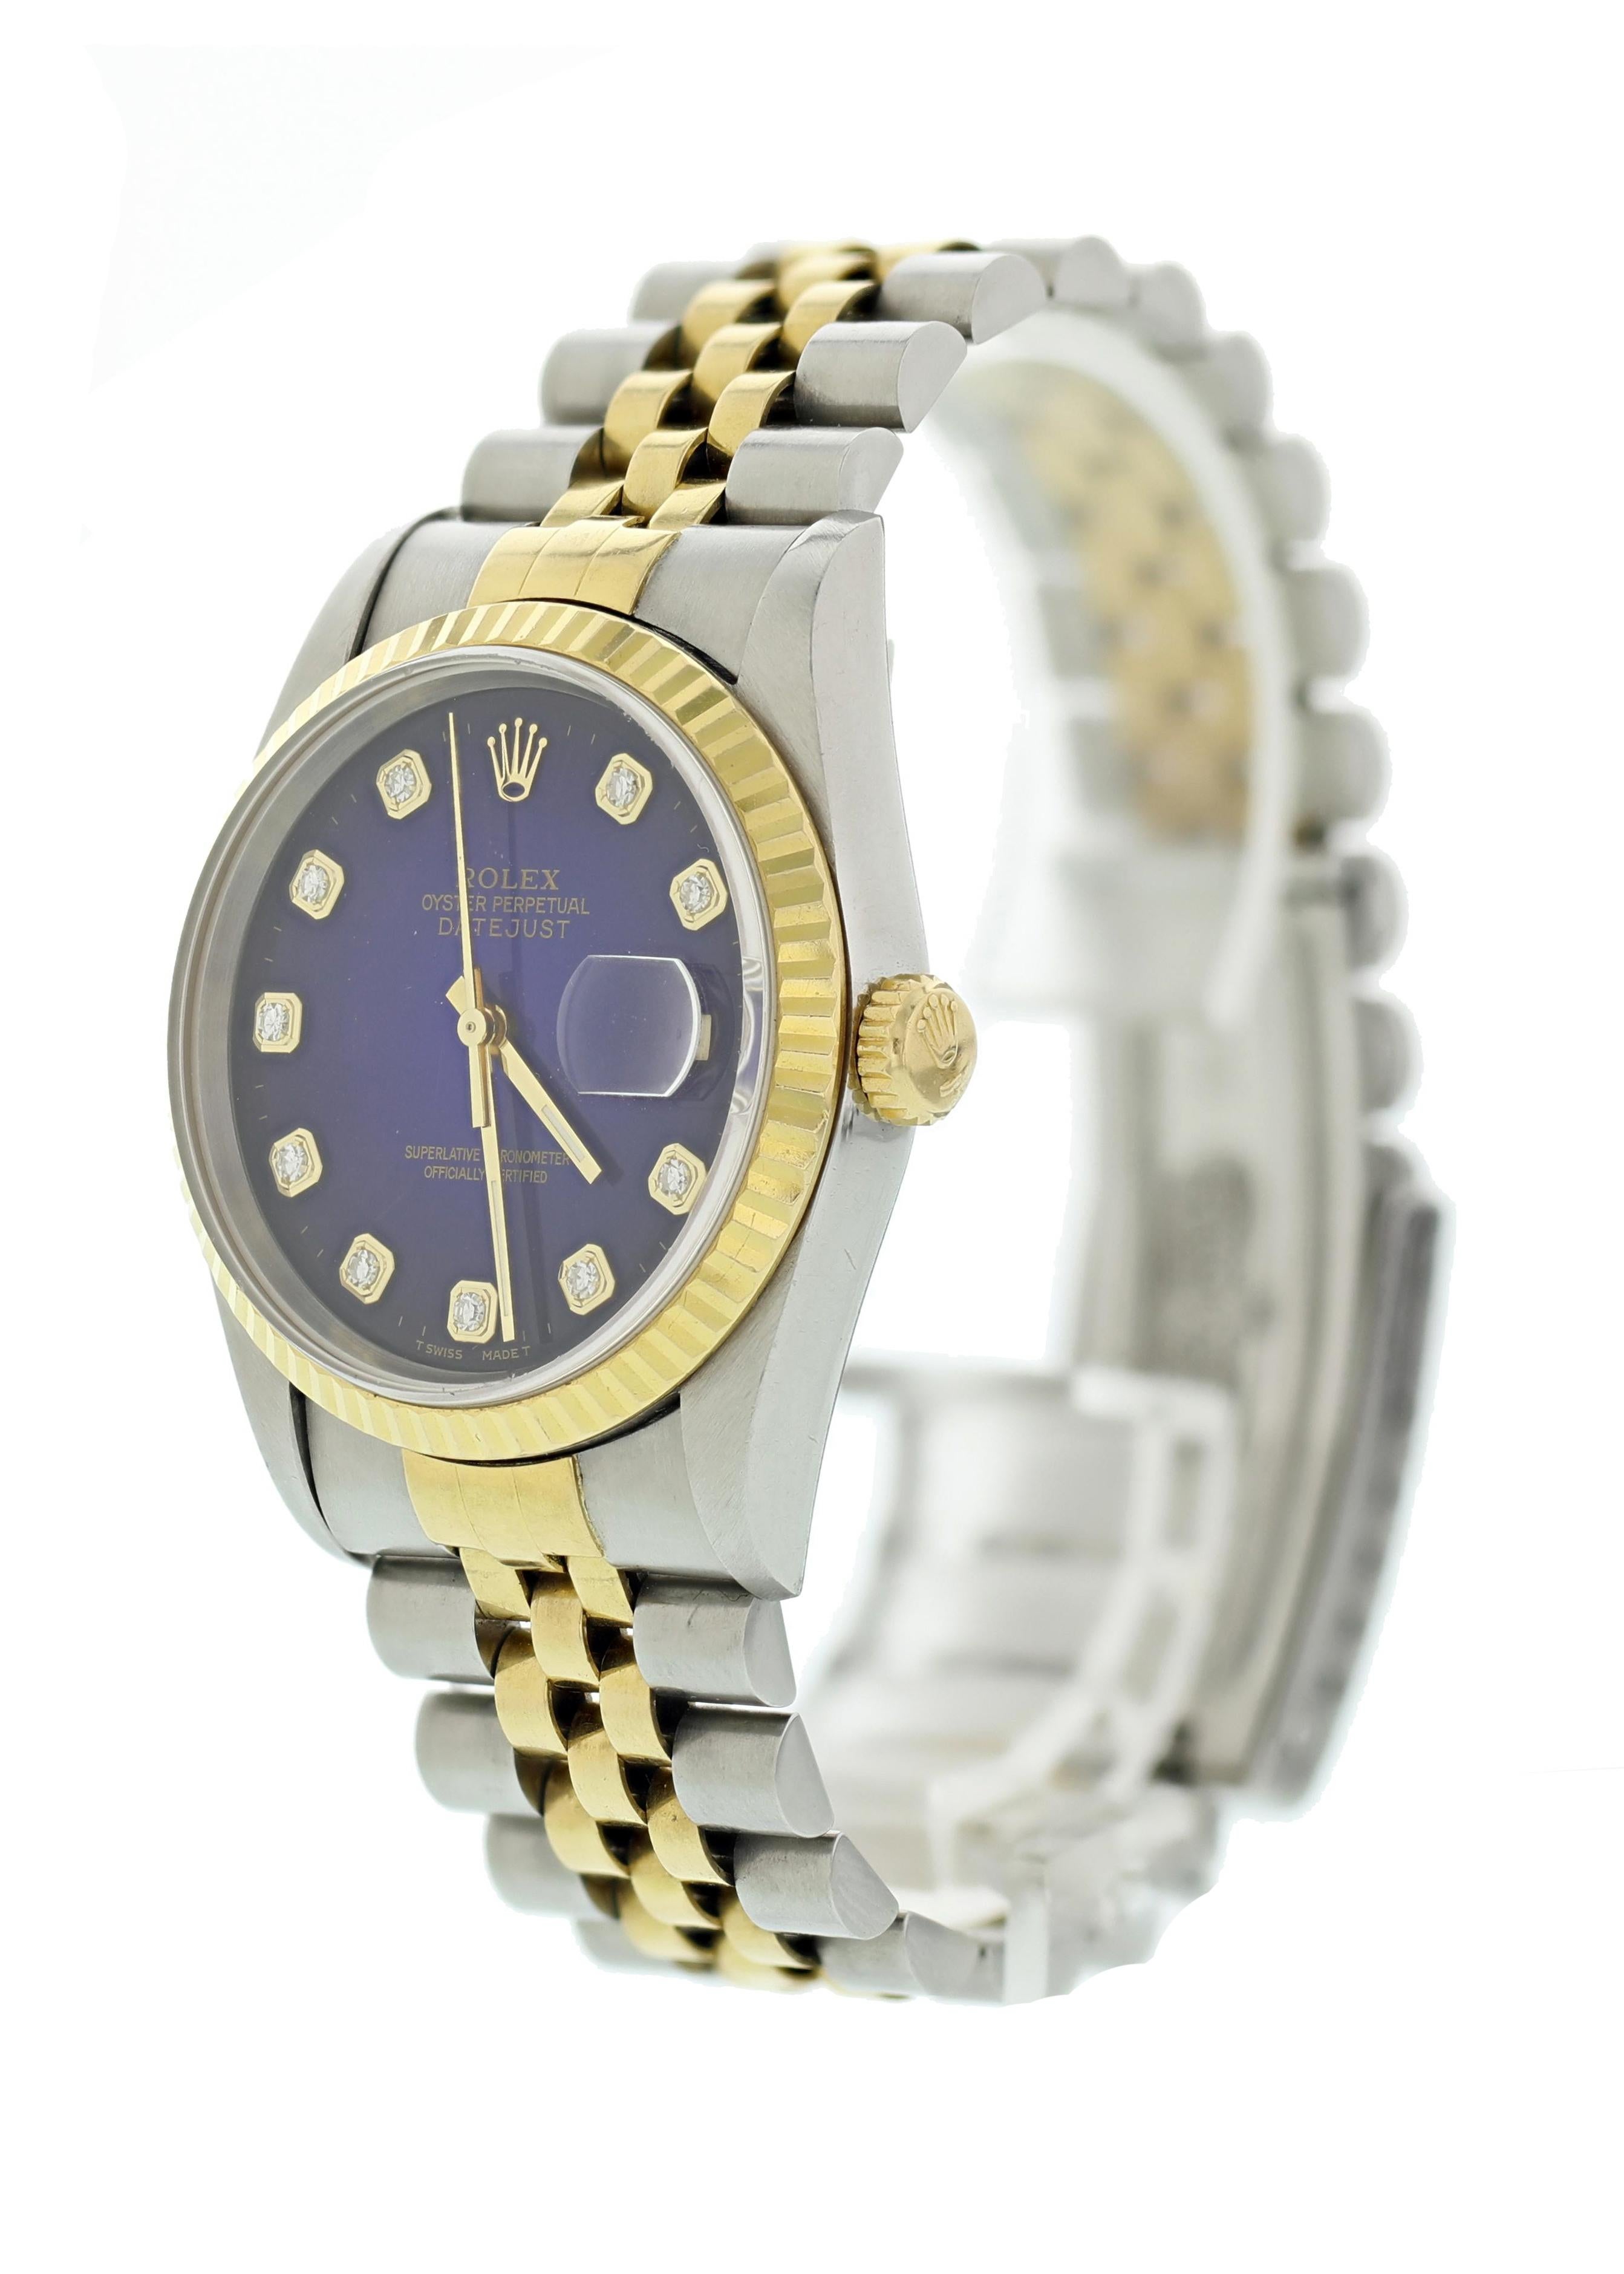 Rolex Oyster Perpetual Datejust 16233 Diamond Dial Men's Watch. 36mm case with an 18K yellow gold fluted bezel. Factory Blue dial with factory placed diamond markers. Quickset date function. 18K yellow gold and stainless steel Jubilee band with a